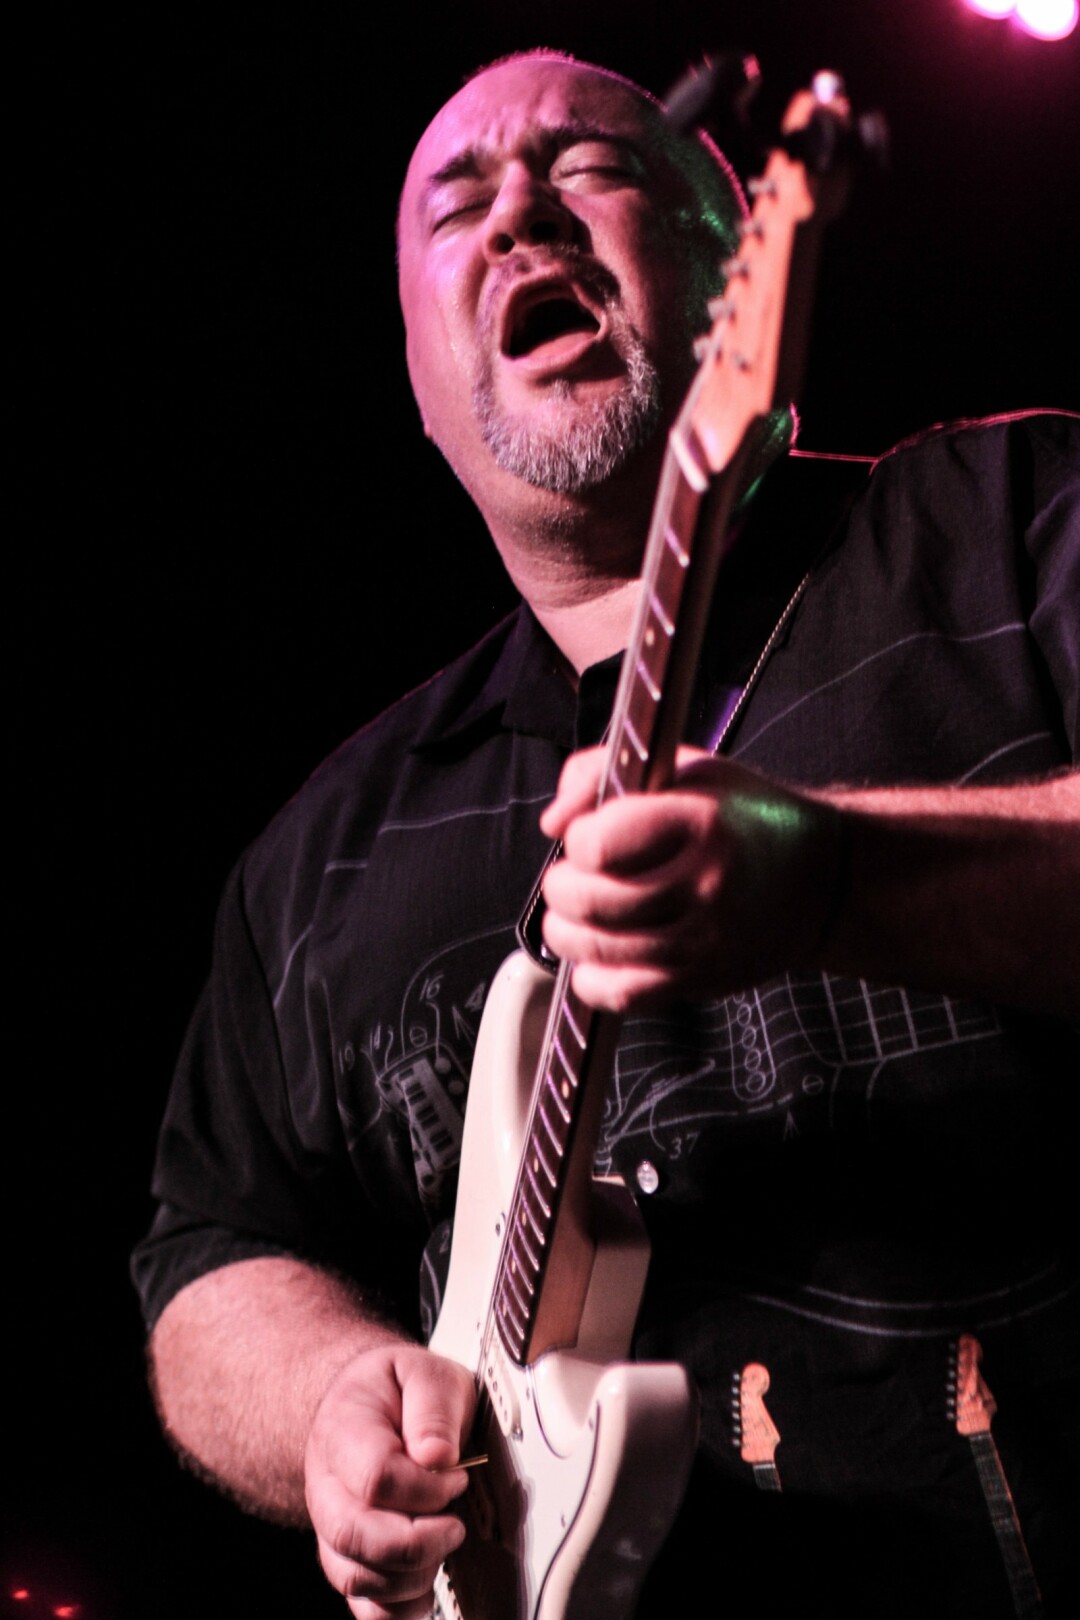 GUITAR HERO. Eau Claire band of yore The Kingsnakes reunited for one last special show at the House of Rock on Friday, July 7 along with South Farwell and The Rattlenecks. Above: Ryan Harrington on the face melting guitar solo. Check out our feature on the House of Rock on page 26.